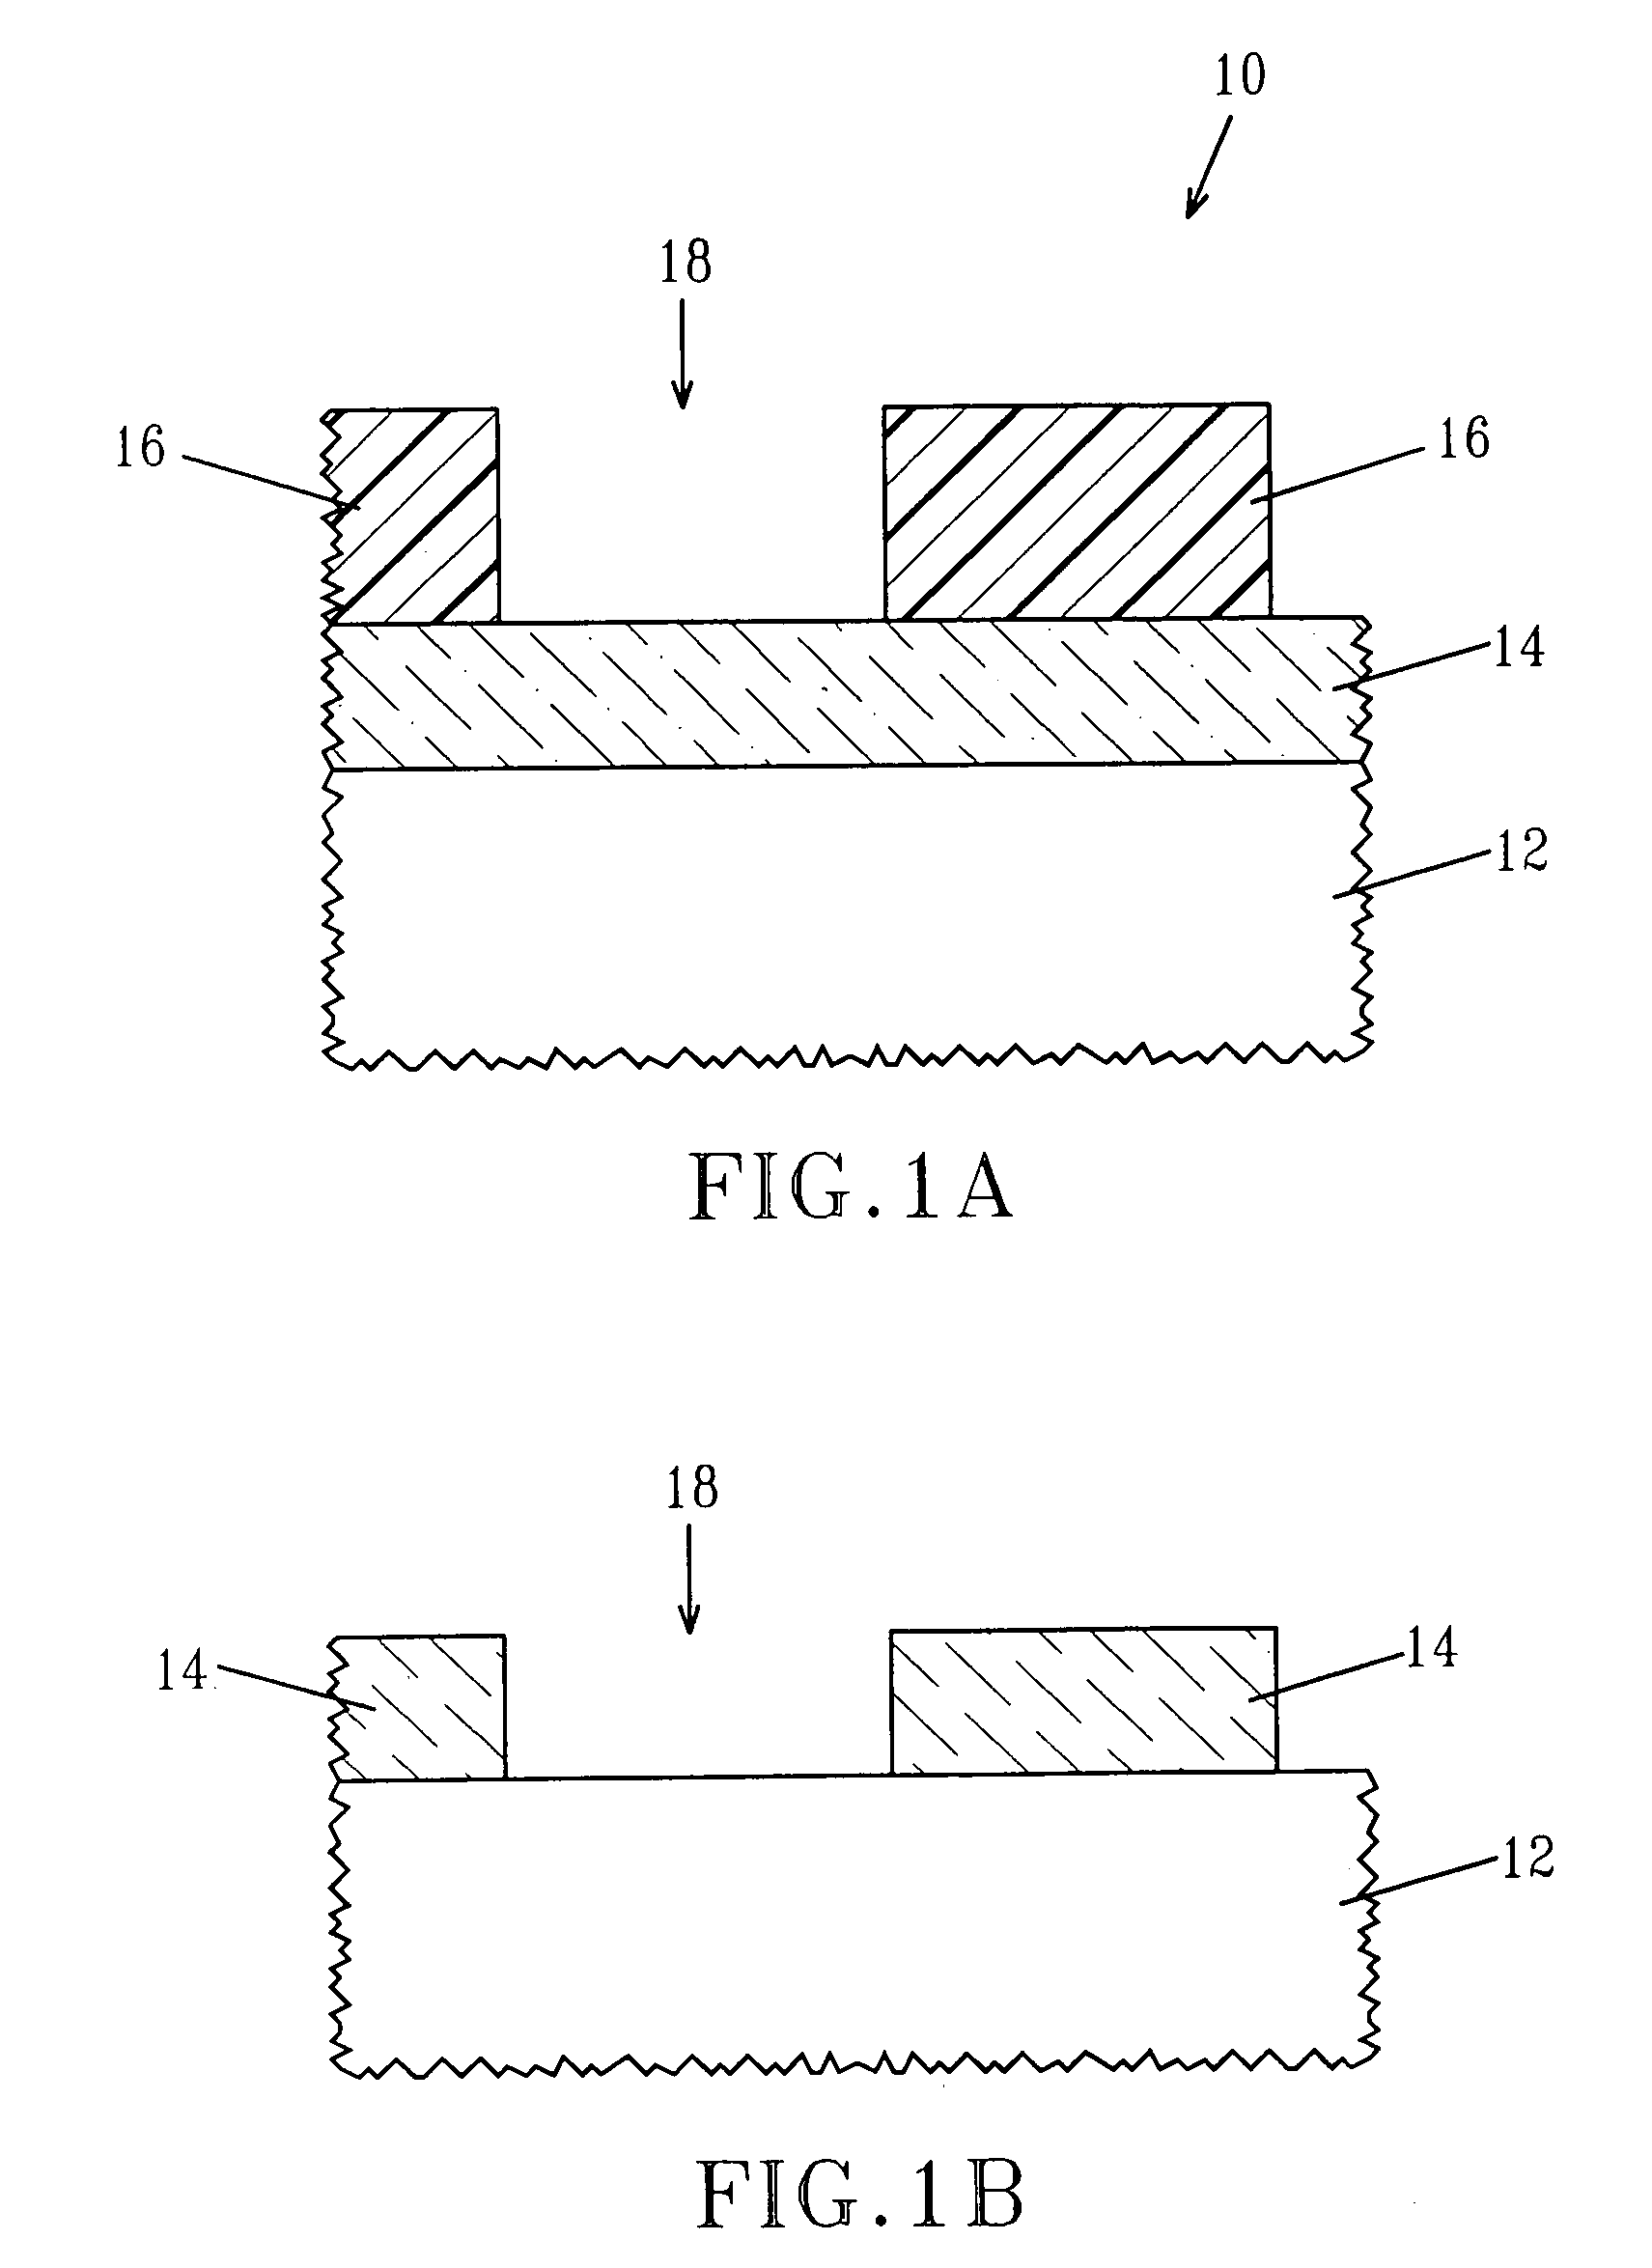 Patterning SOI with silicon mask to create box at different depths